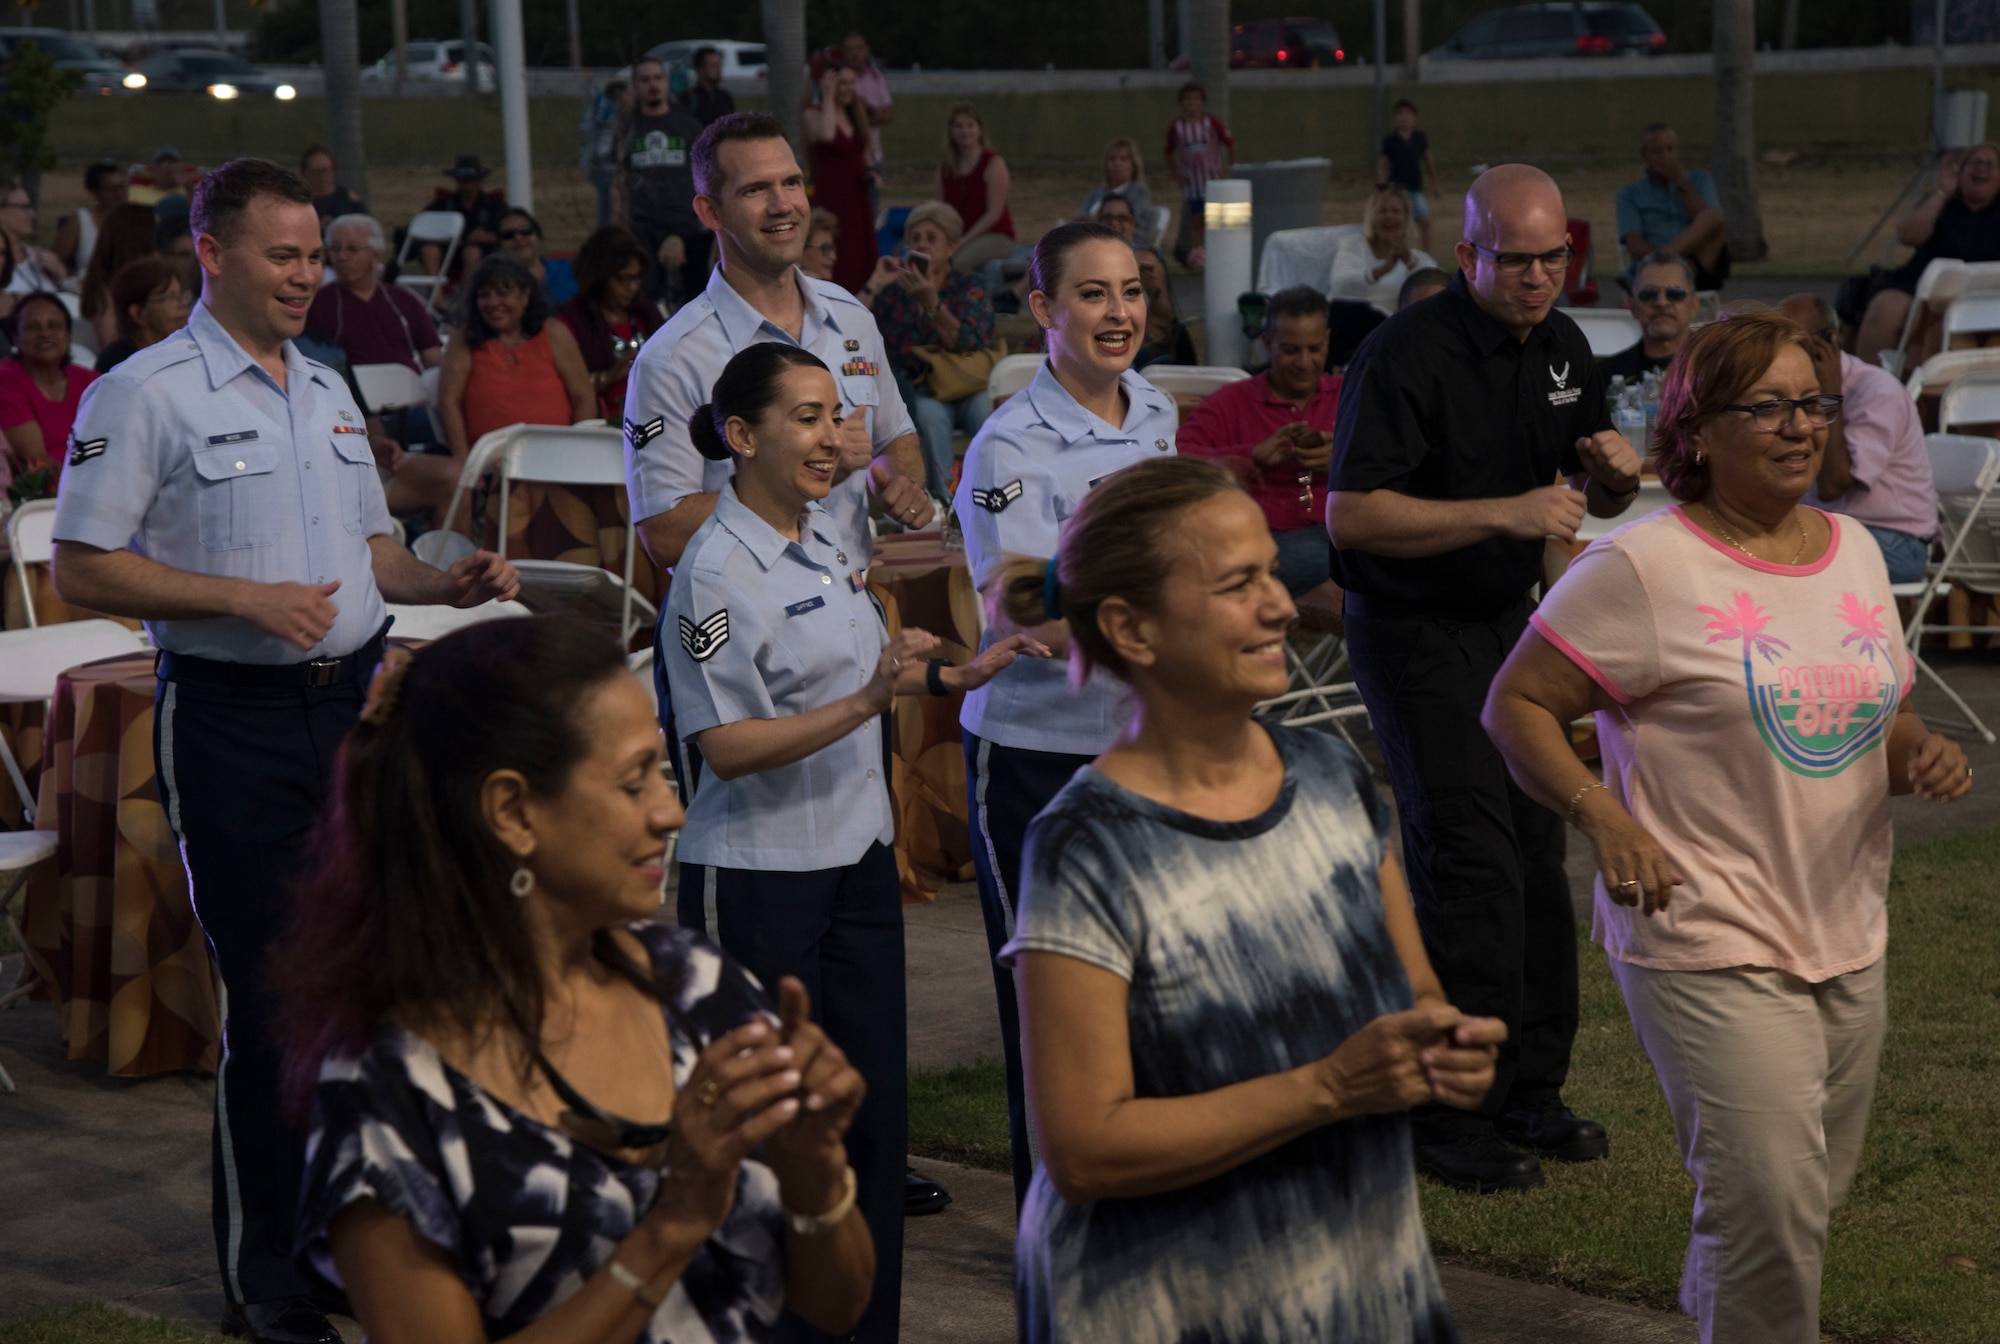 The United States Air Force Band of the West, from Joint Base San Antonio-Lackland, perform at Jardin Urbano de Isla Verde in Carolina, Puerto Rico, April 5, 2019 as part of a series of performances and masterclasses around the island featuring multiple Band of the West ensembles. The USAF Band of the West are touring the island of Puerto Rico to tell the Air Force's story through live music and to continue building relationships with Puerto Rican communities during concerts. (U.S. Air Force photo by: Airman 1st Class Shelby Pruitt)